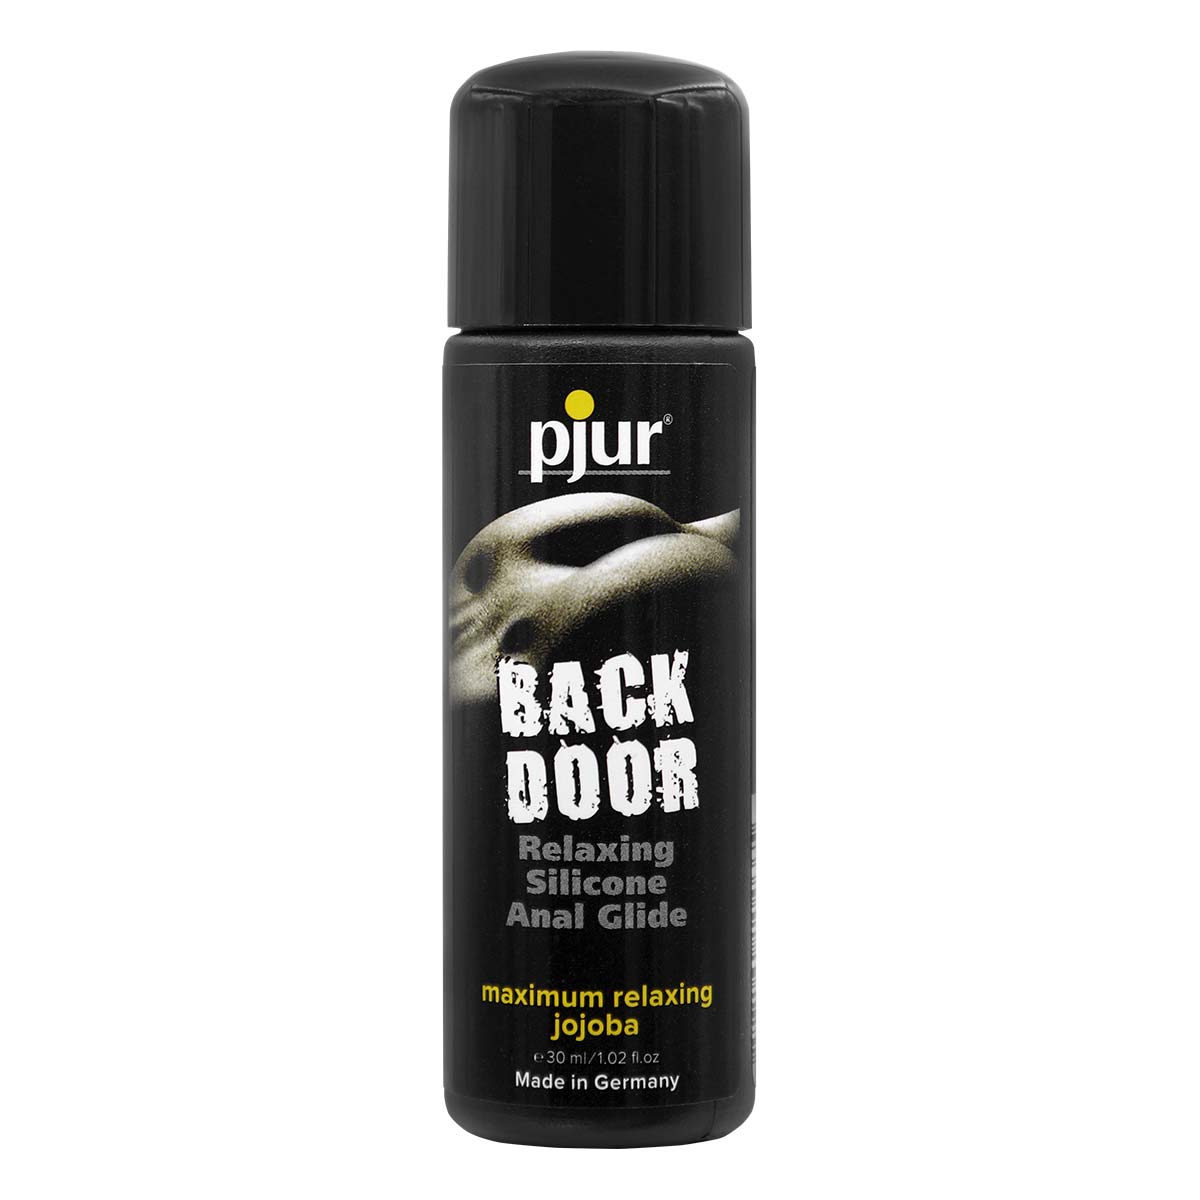 pjur BACK DOOR RELAXING Silicone Anal Glide 30ml Silicone-based Lubricant-p_2